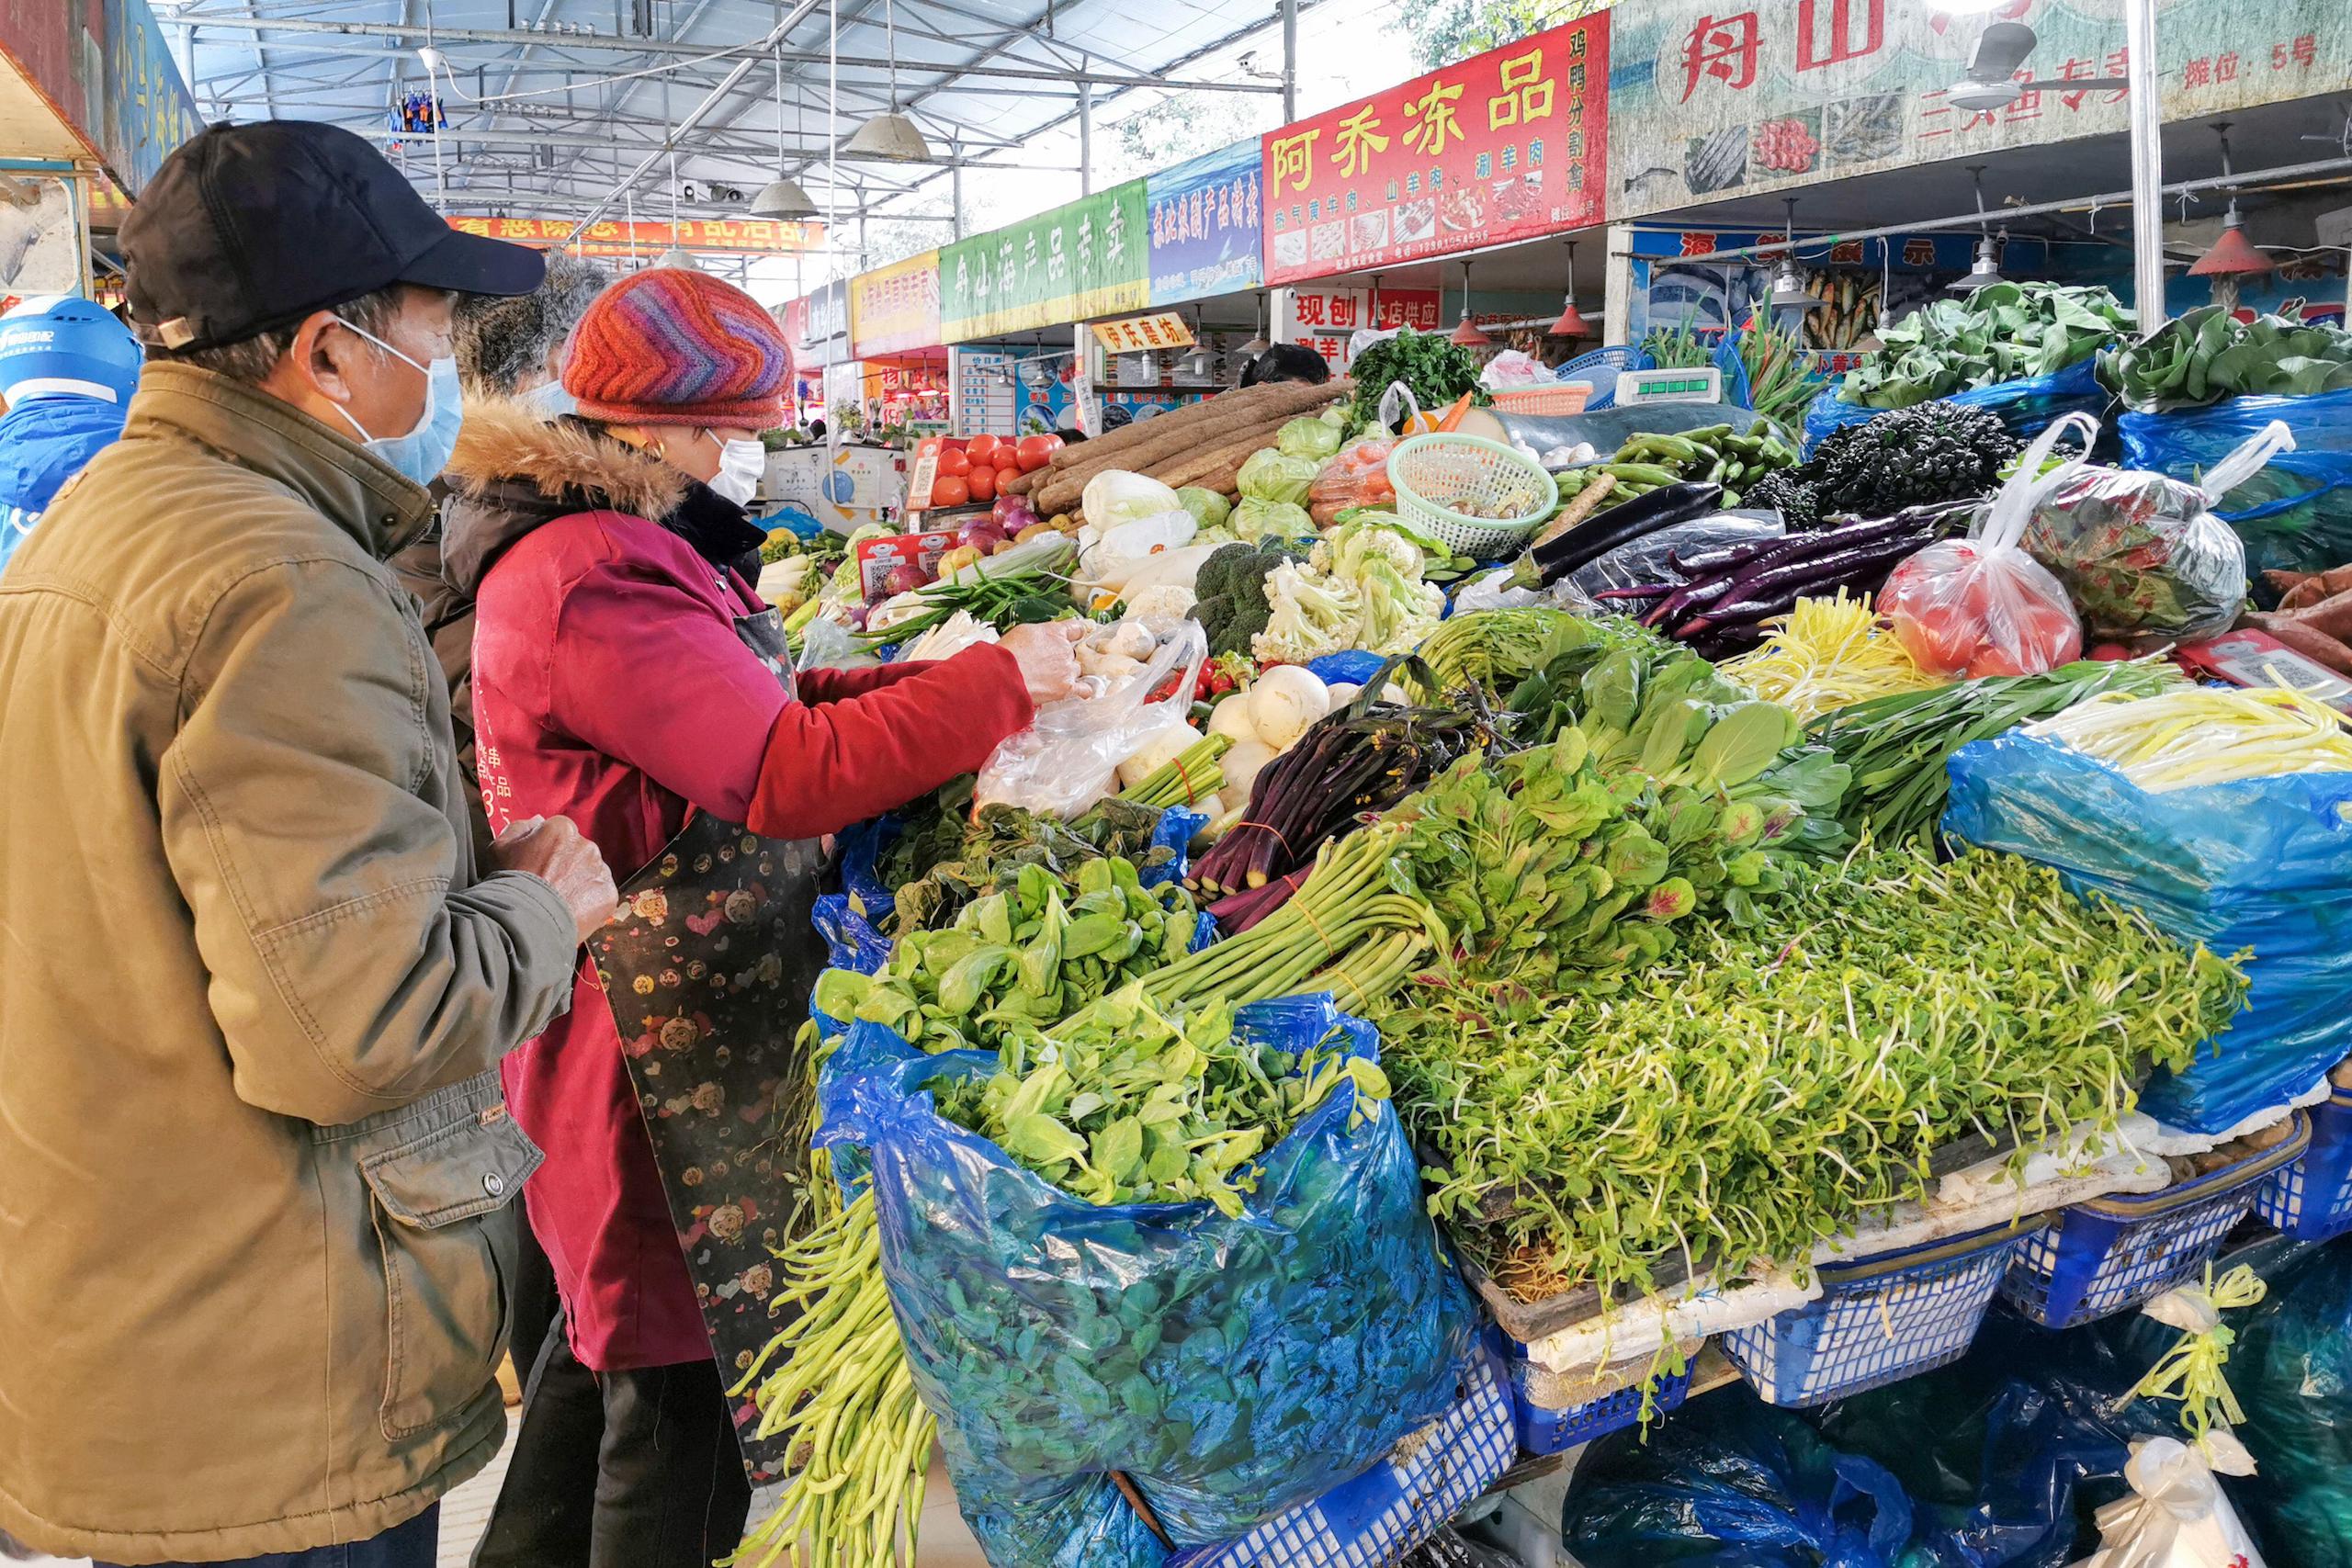 Where China's food policies and climate goals meet | China Dialogue